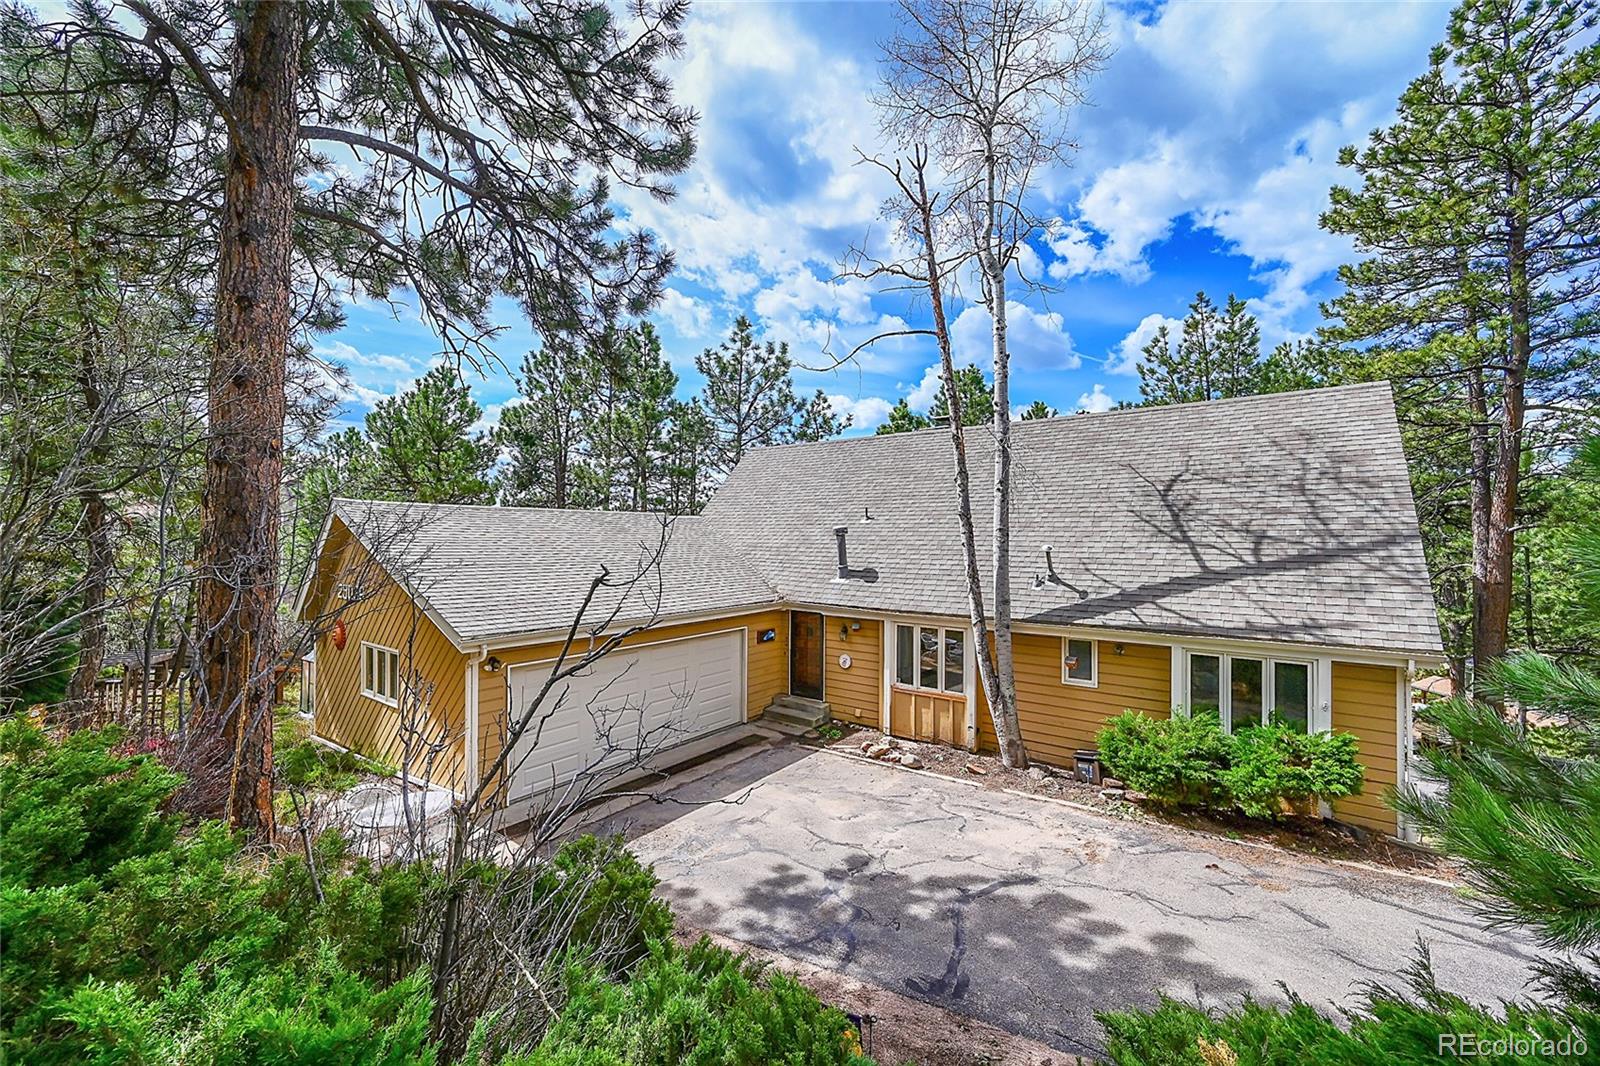 29036  clover lane, evergreen sold home. Closed on 2024-05-17 for $925,000.